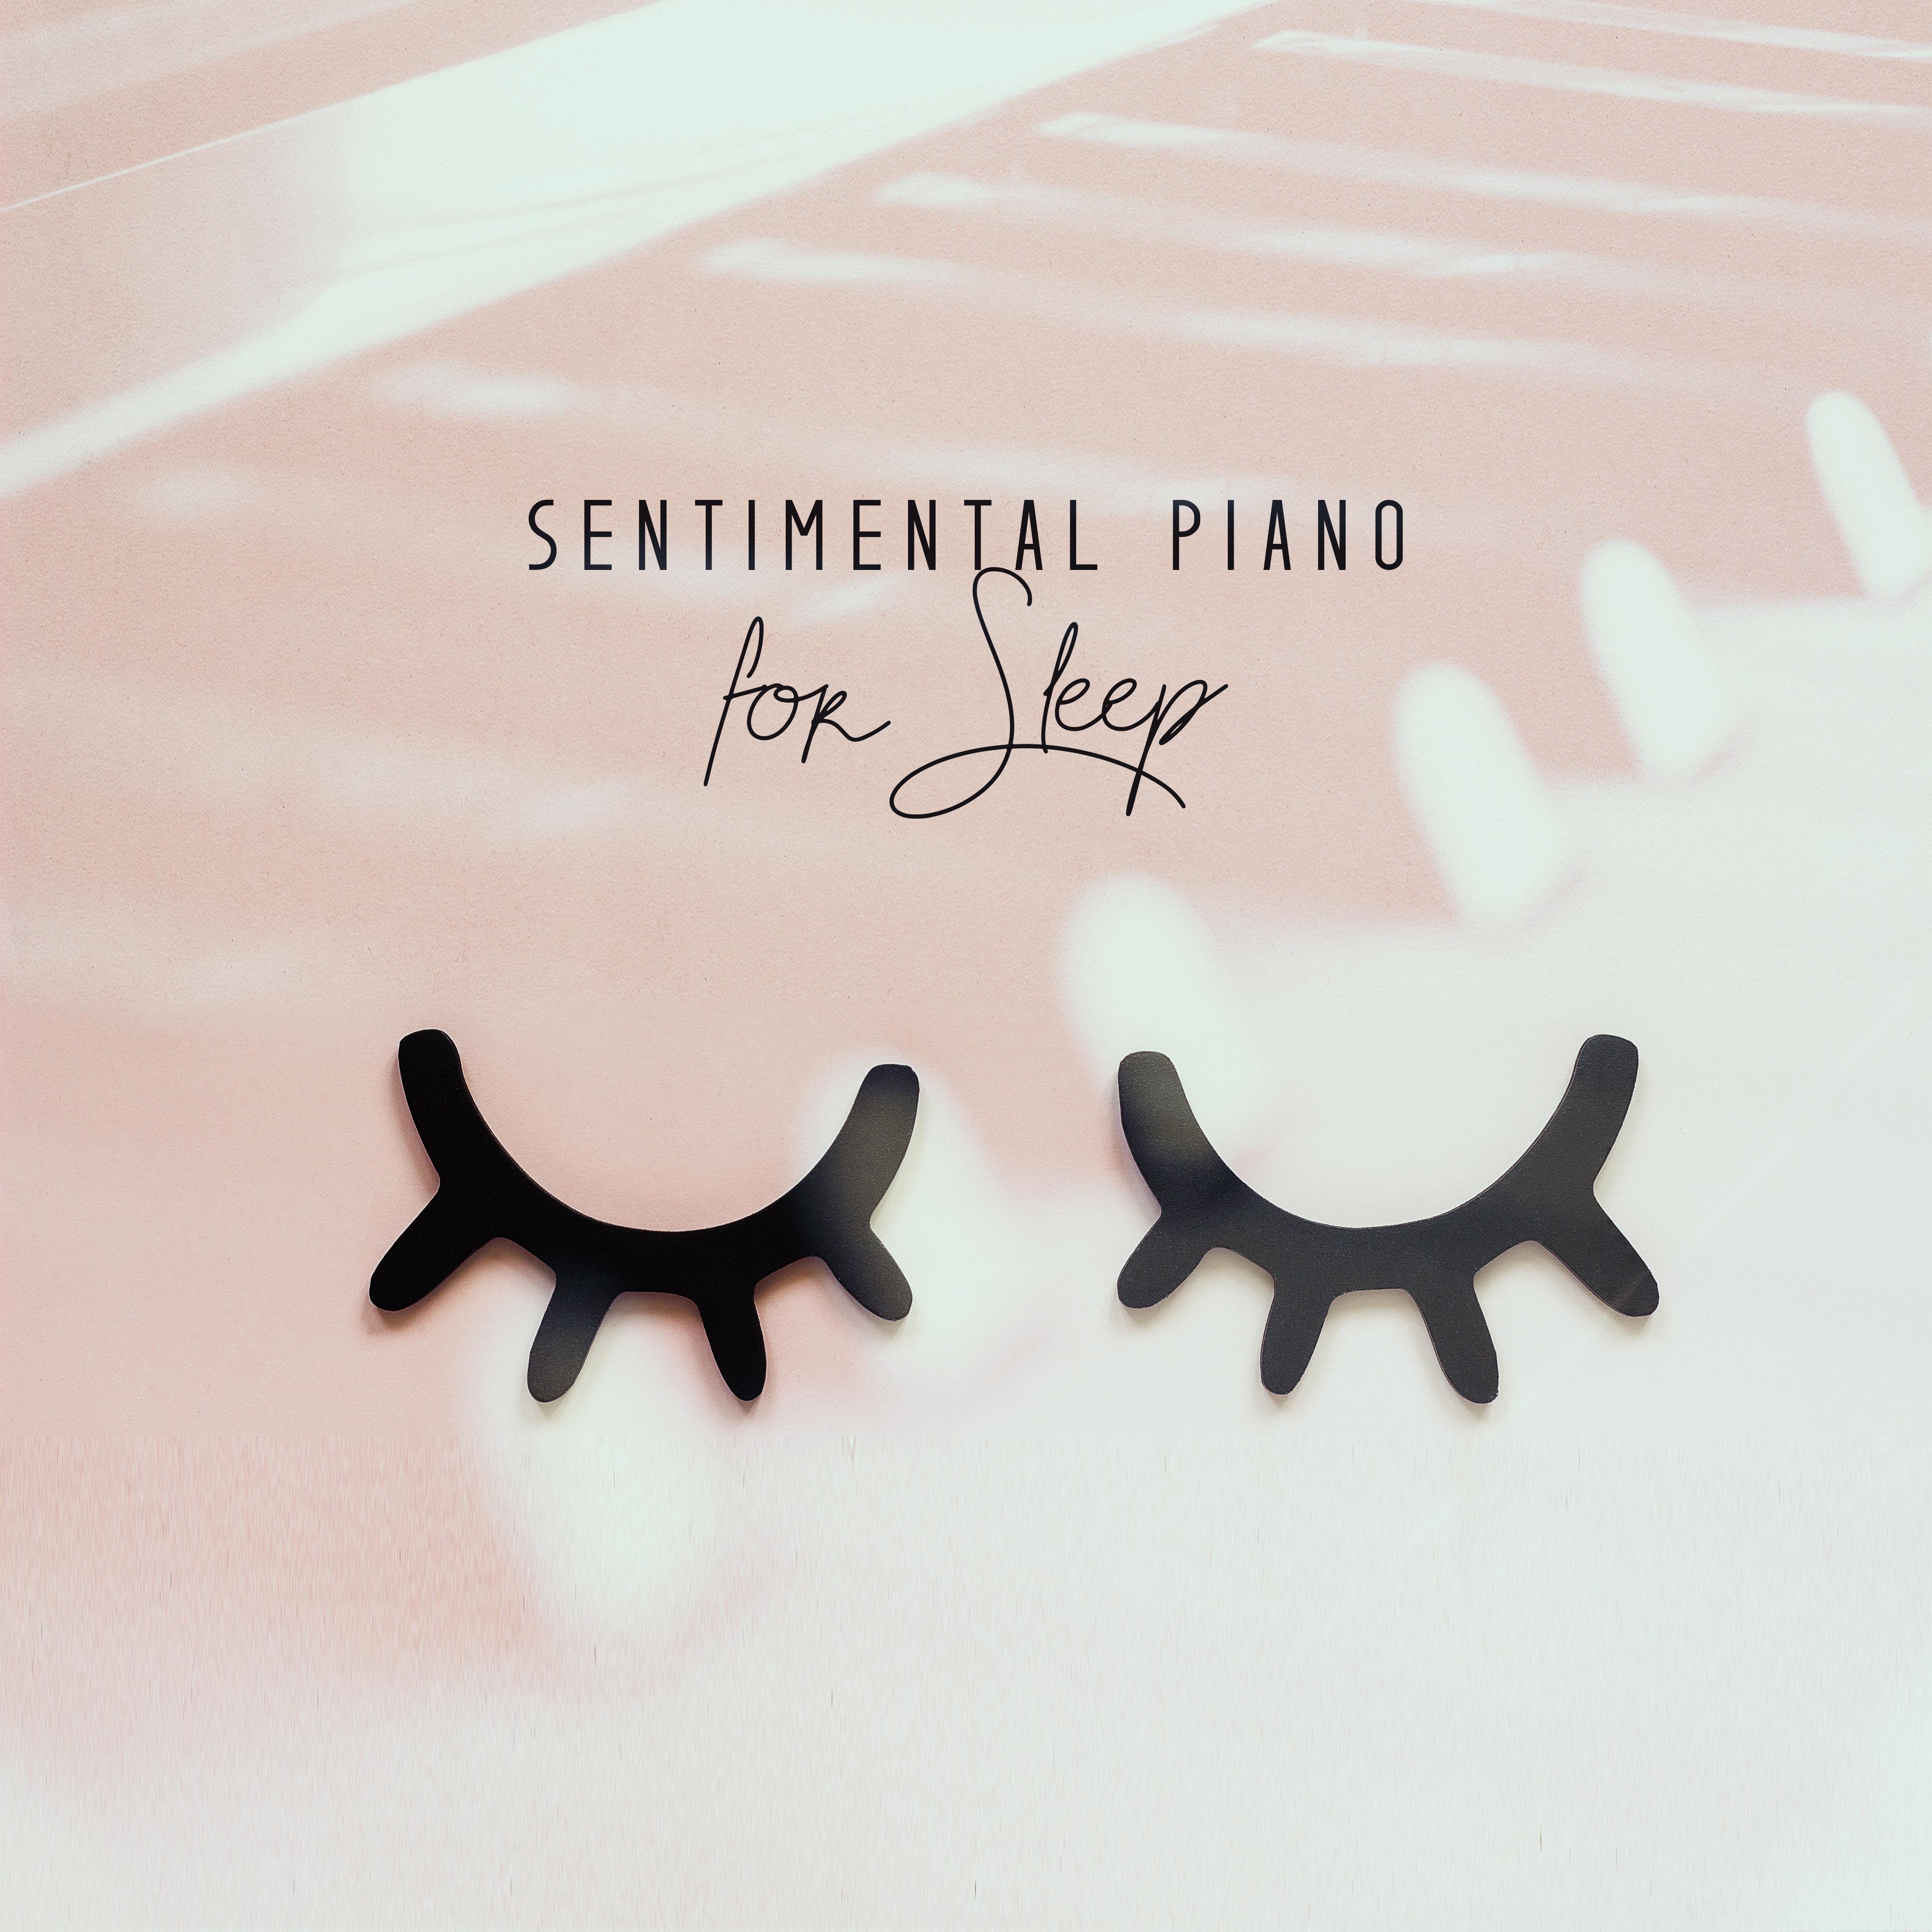 Sentimental Piano for Sleep - Soothing Melodies that Gently Put You to Sleep (Universal Instrumental Music for Adults and Children)